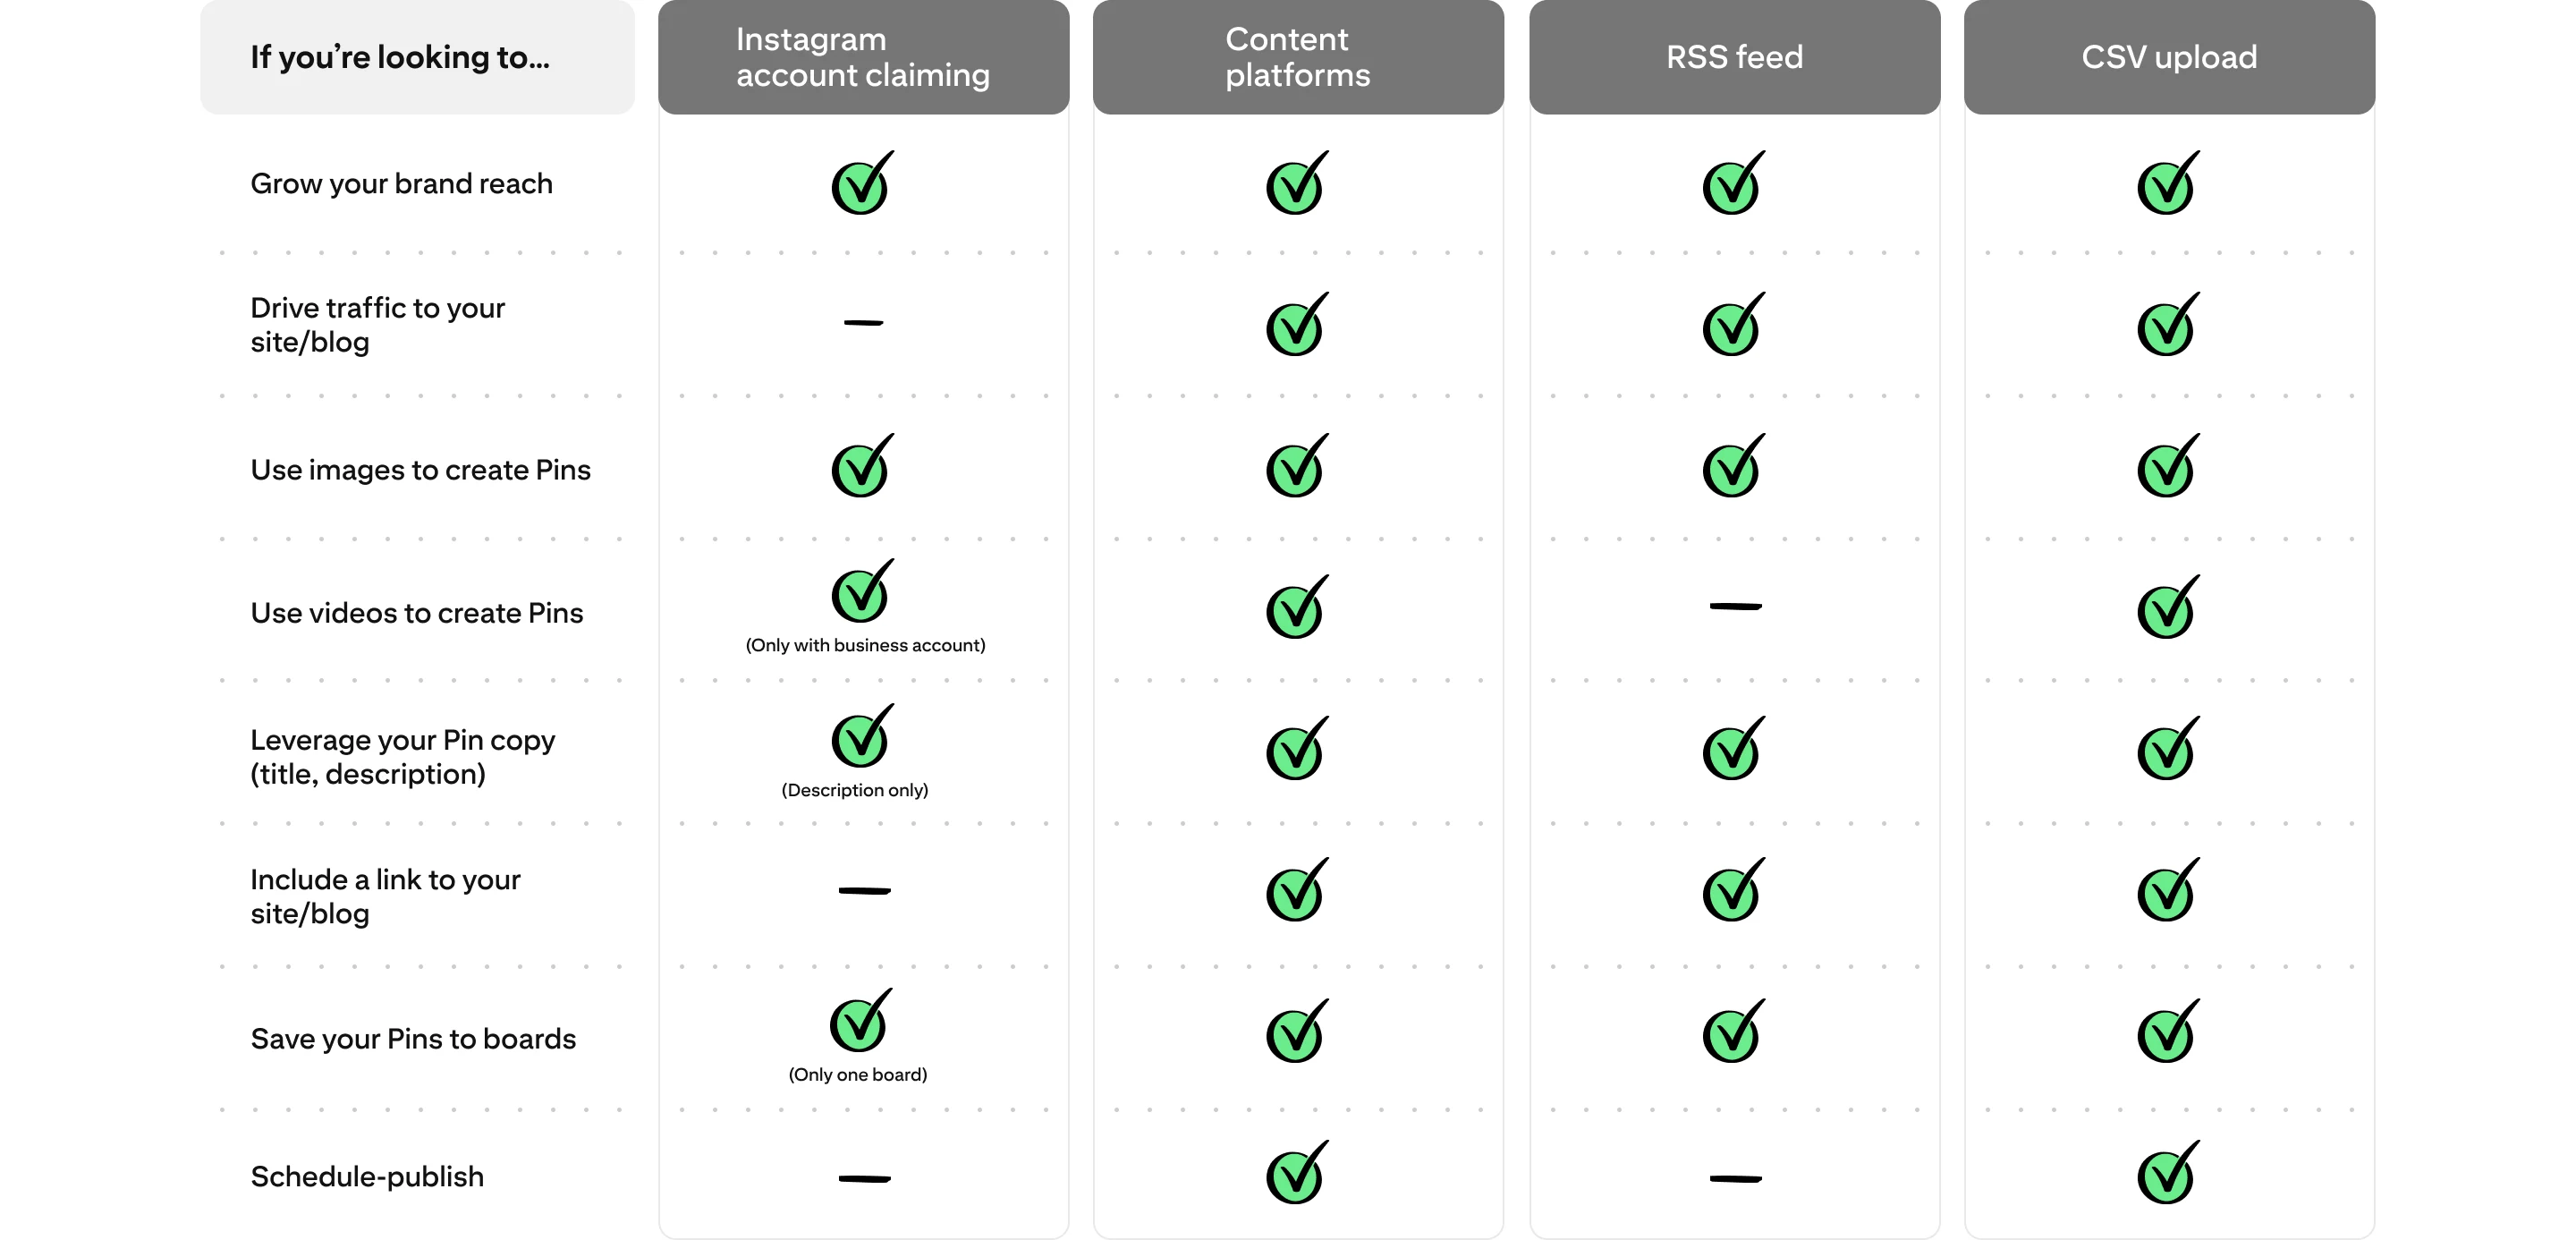 Chart comparing available features of Instagram account claiming, content platforms, RSS feed and CSV upload